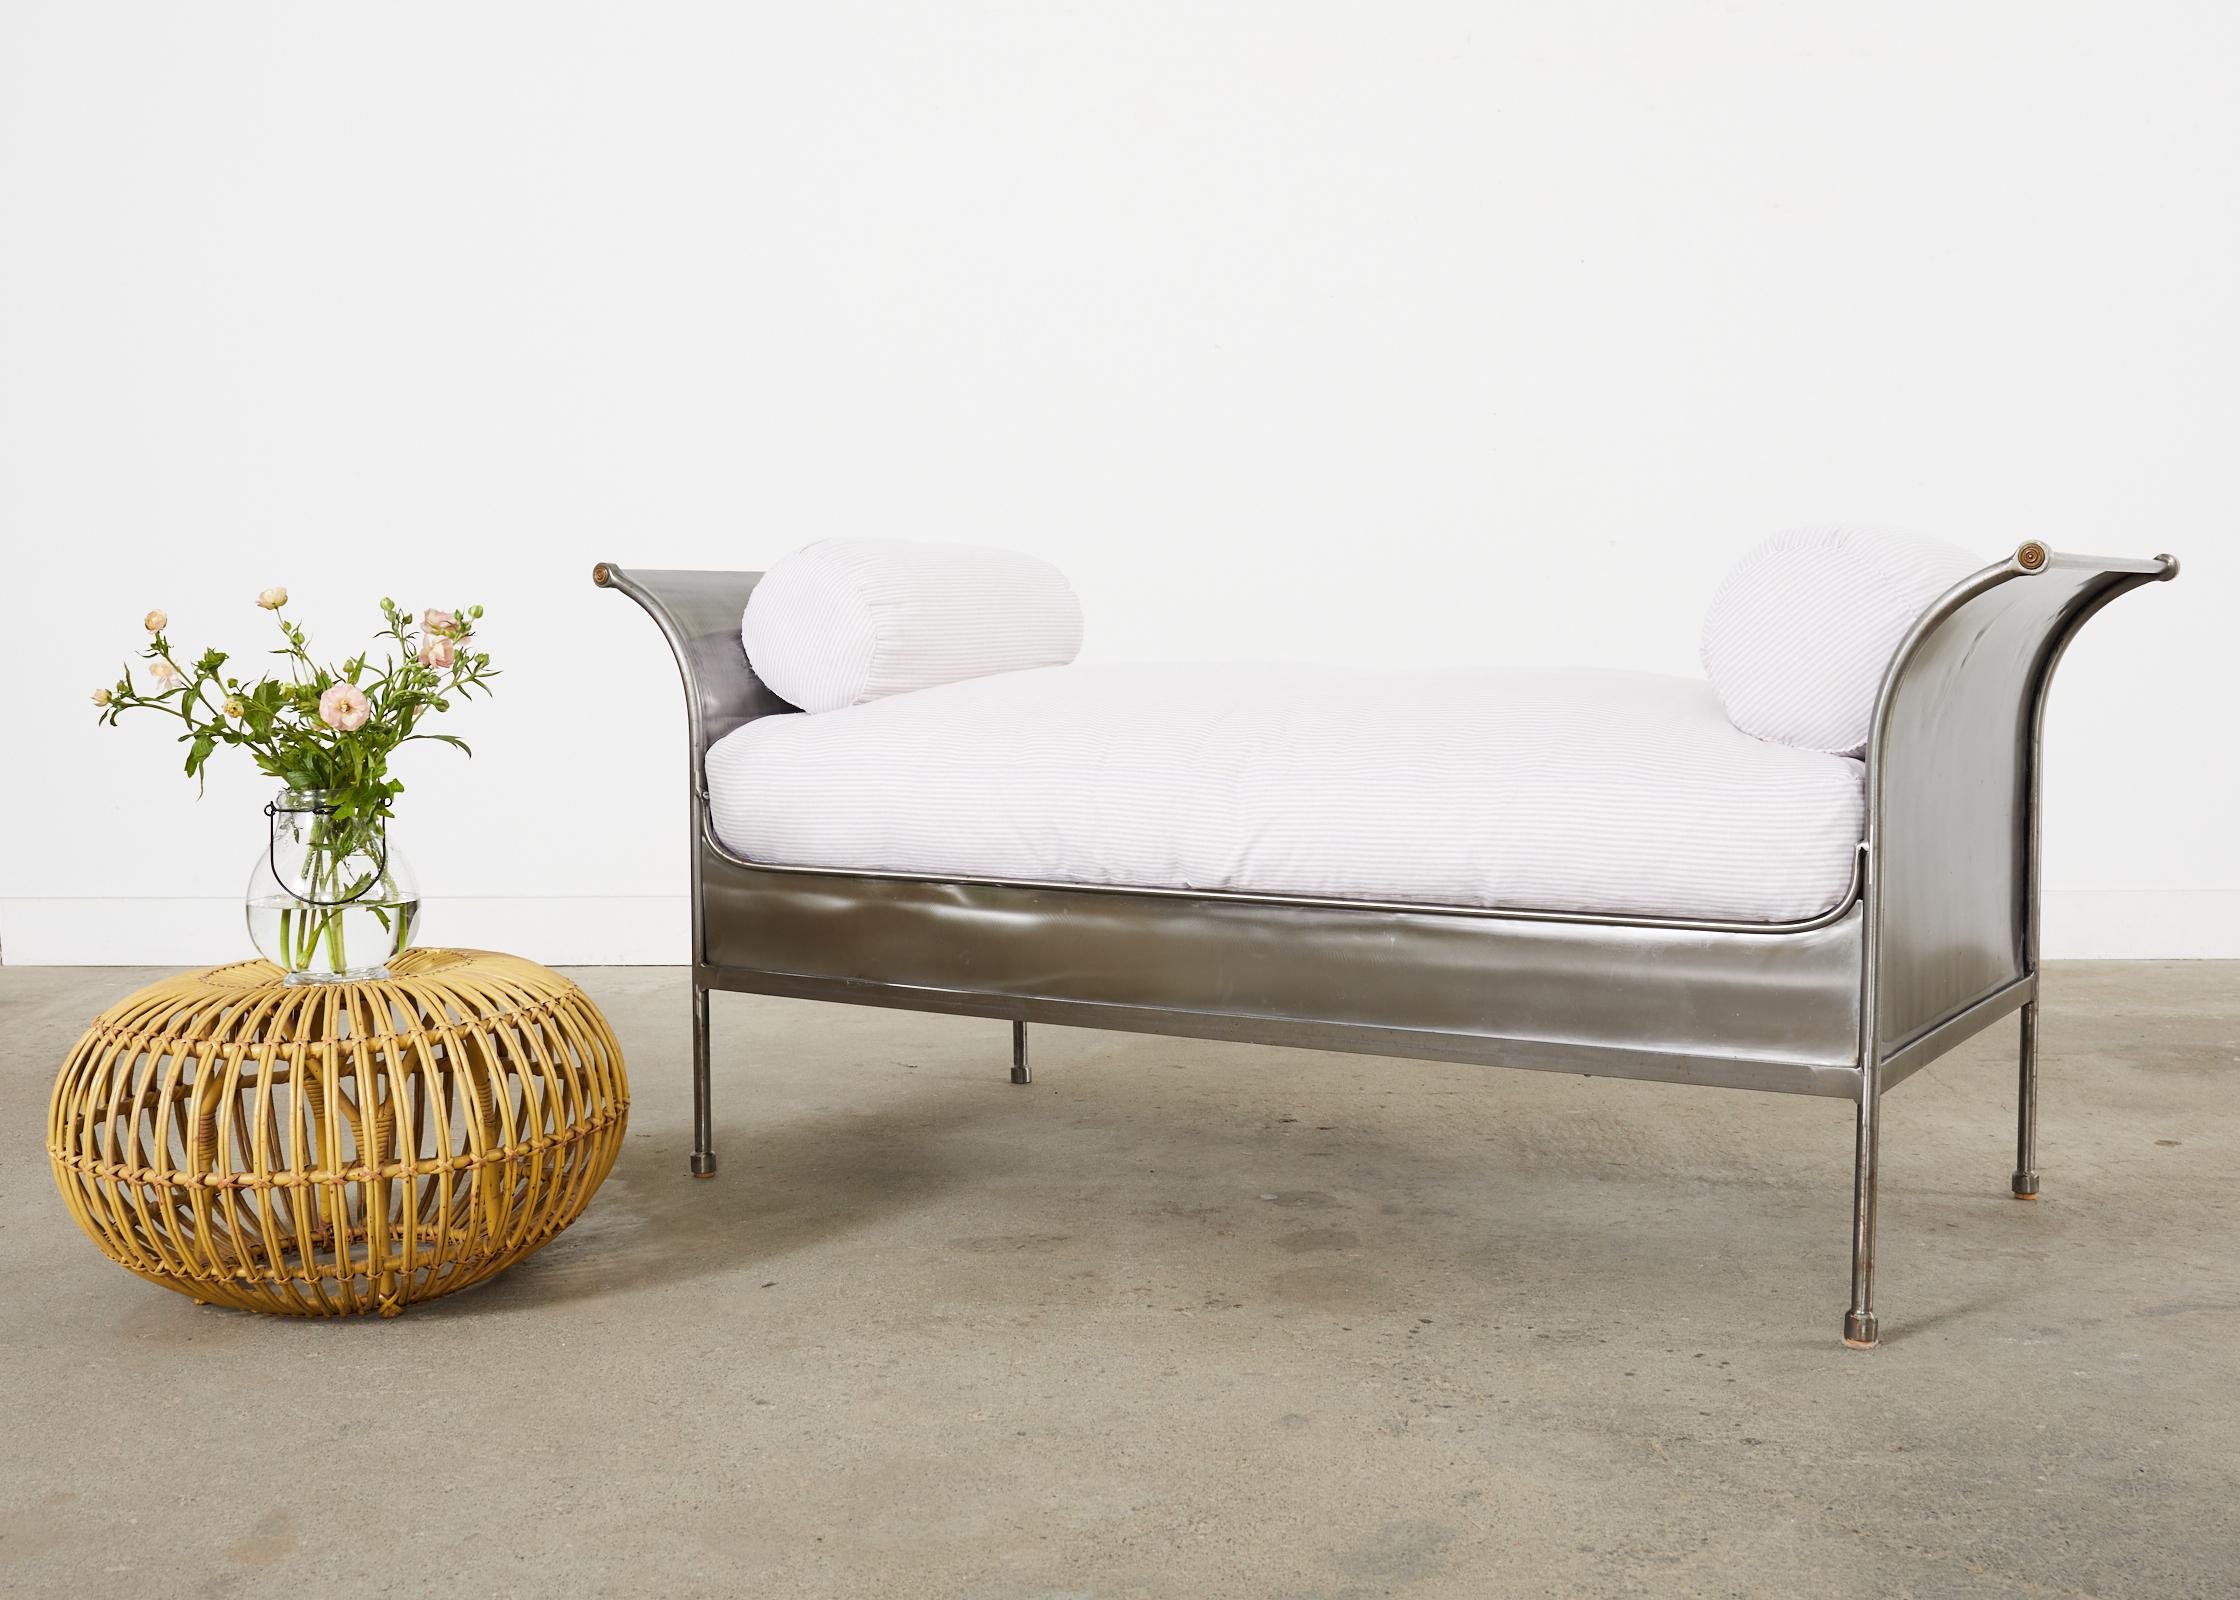 Spectacular French mid-century modern sleigh daybed hand-crafted from polished steel. The bed has a dramatic patinated nickel finish made in the industrial style. Each end of the bed gracefully curves and flares out on the ends with a small bronze